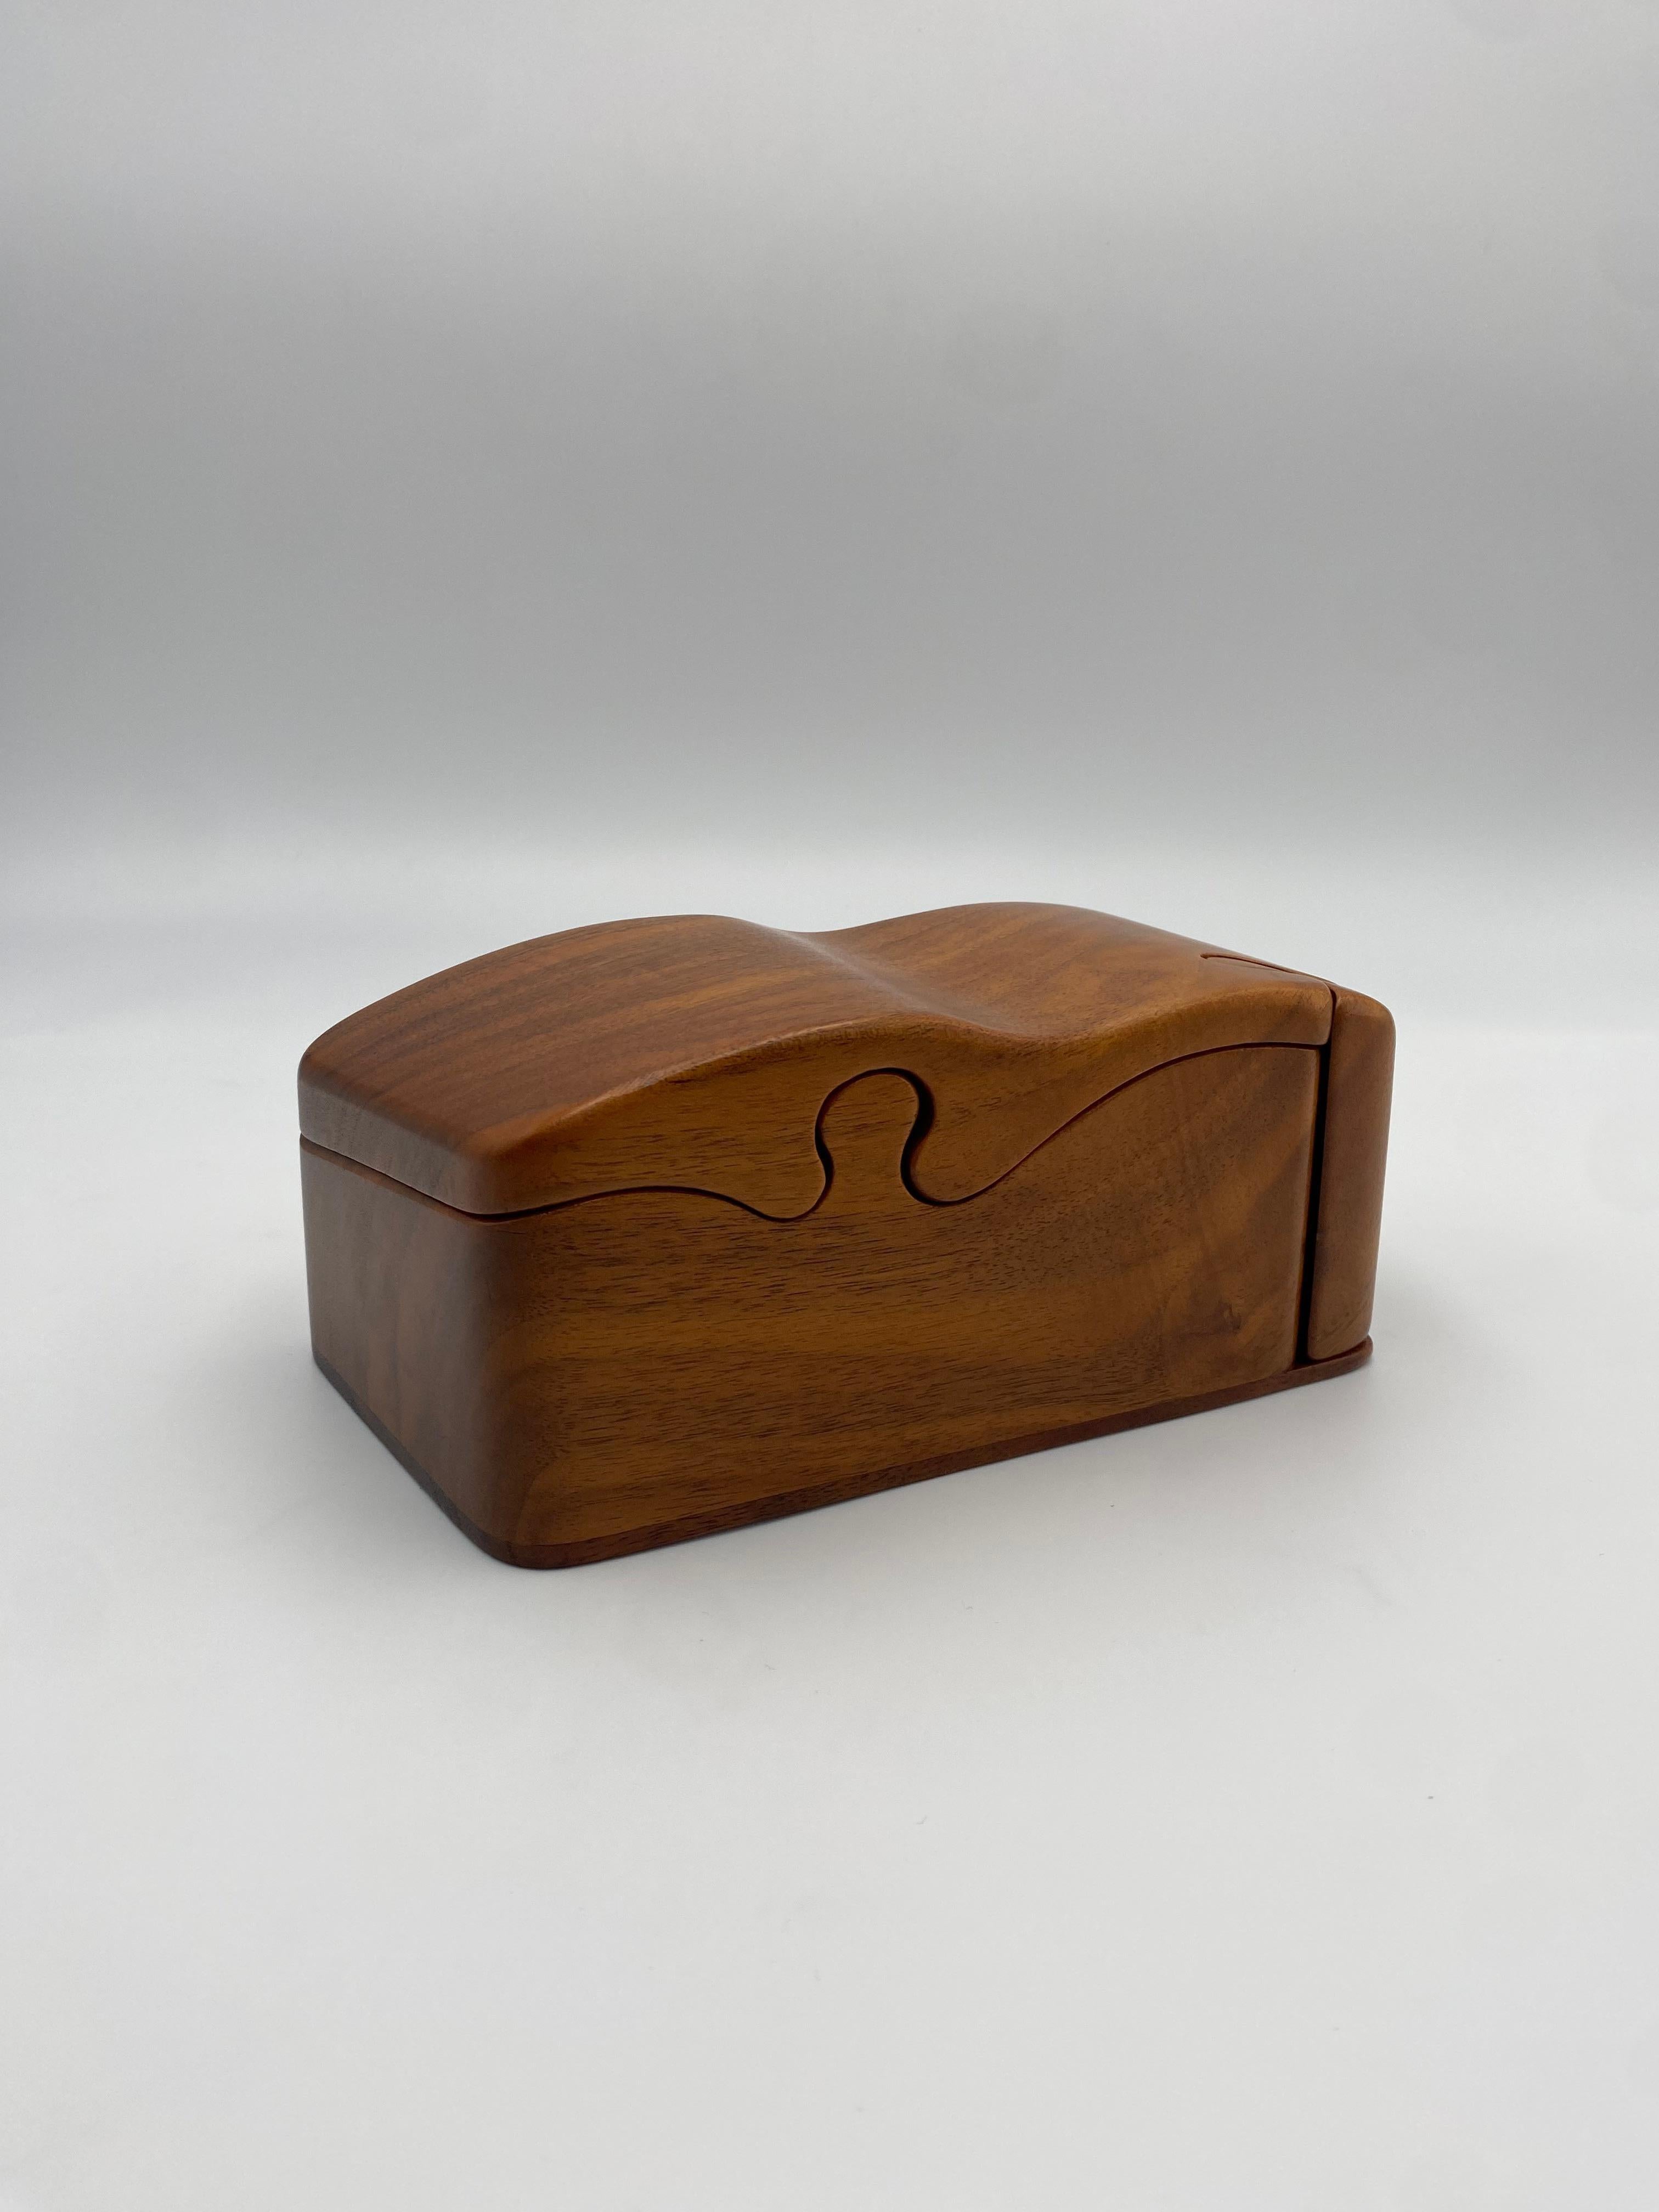 Hand-Crafted Large Fred and Marilyn Buss Trinket Puzzle Box, 1980s